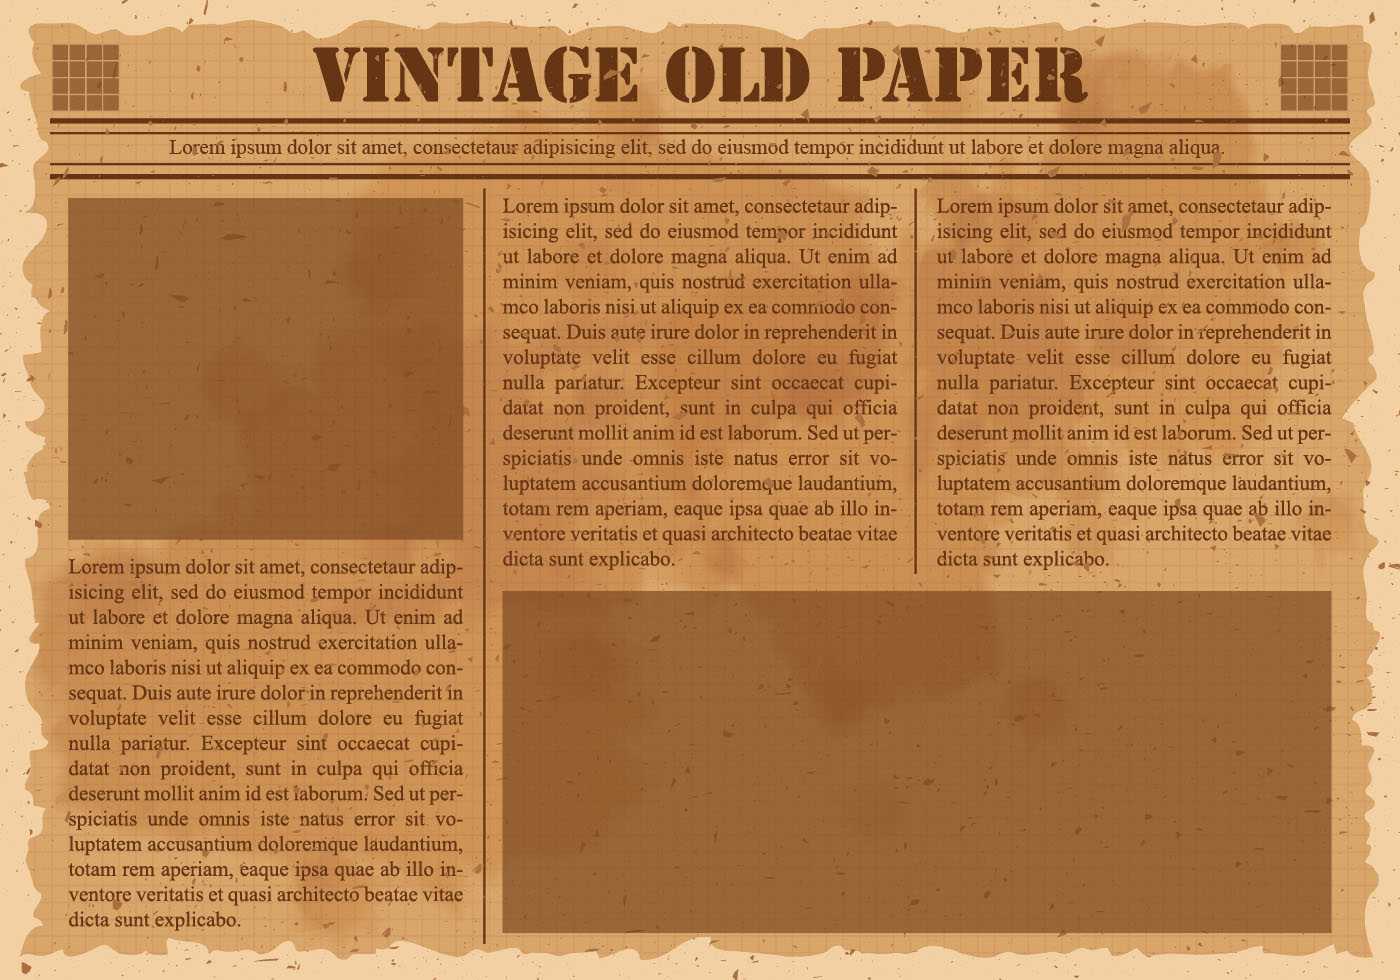 Old Vintage Newspaper - Download Free Vectors, Clipart Throughout Old Blank Newspaper Template